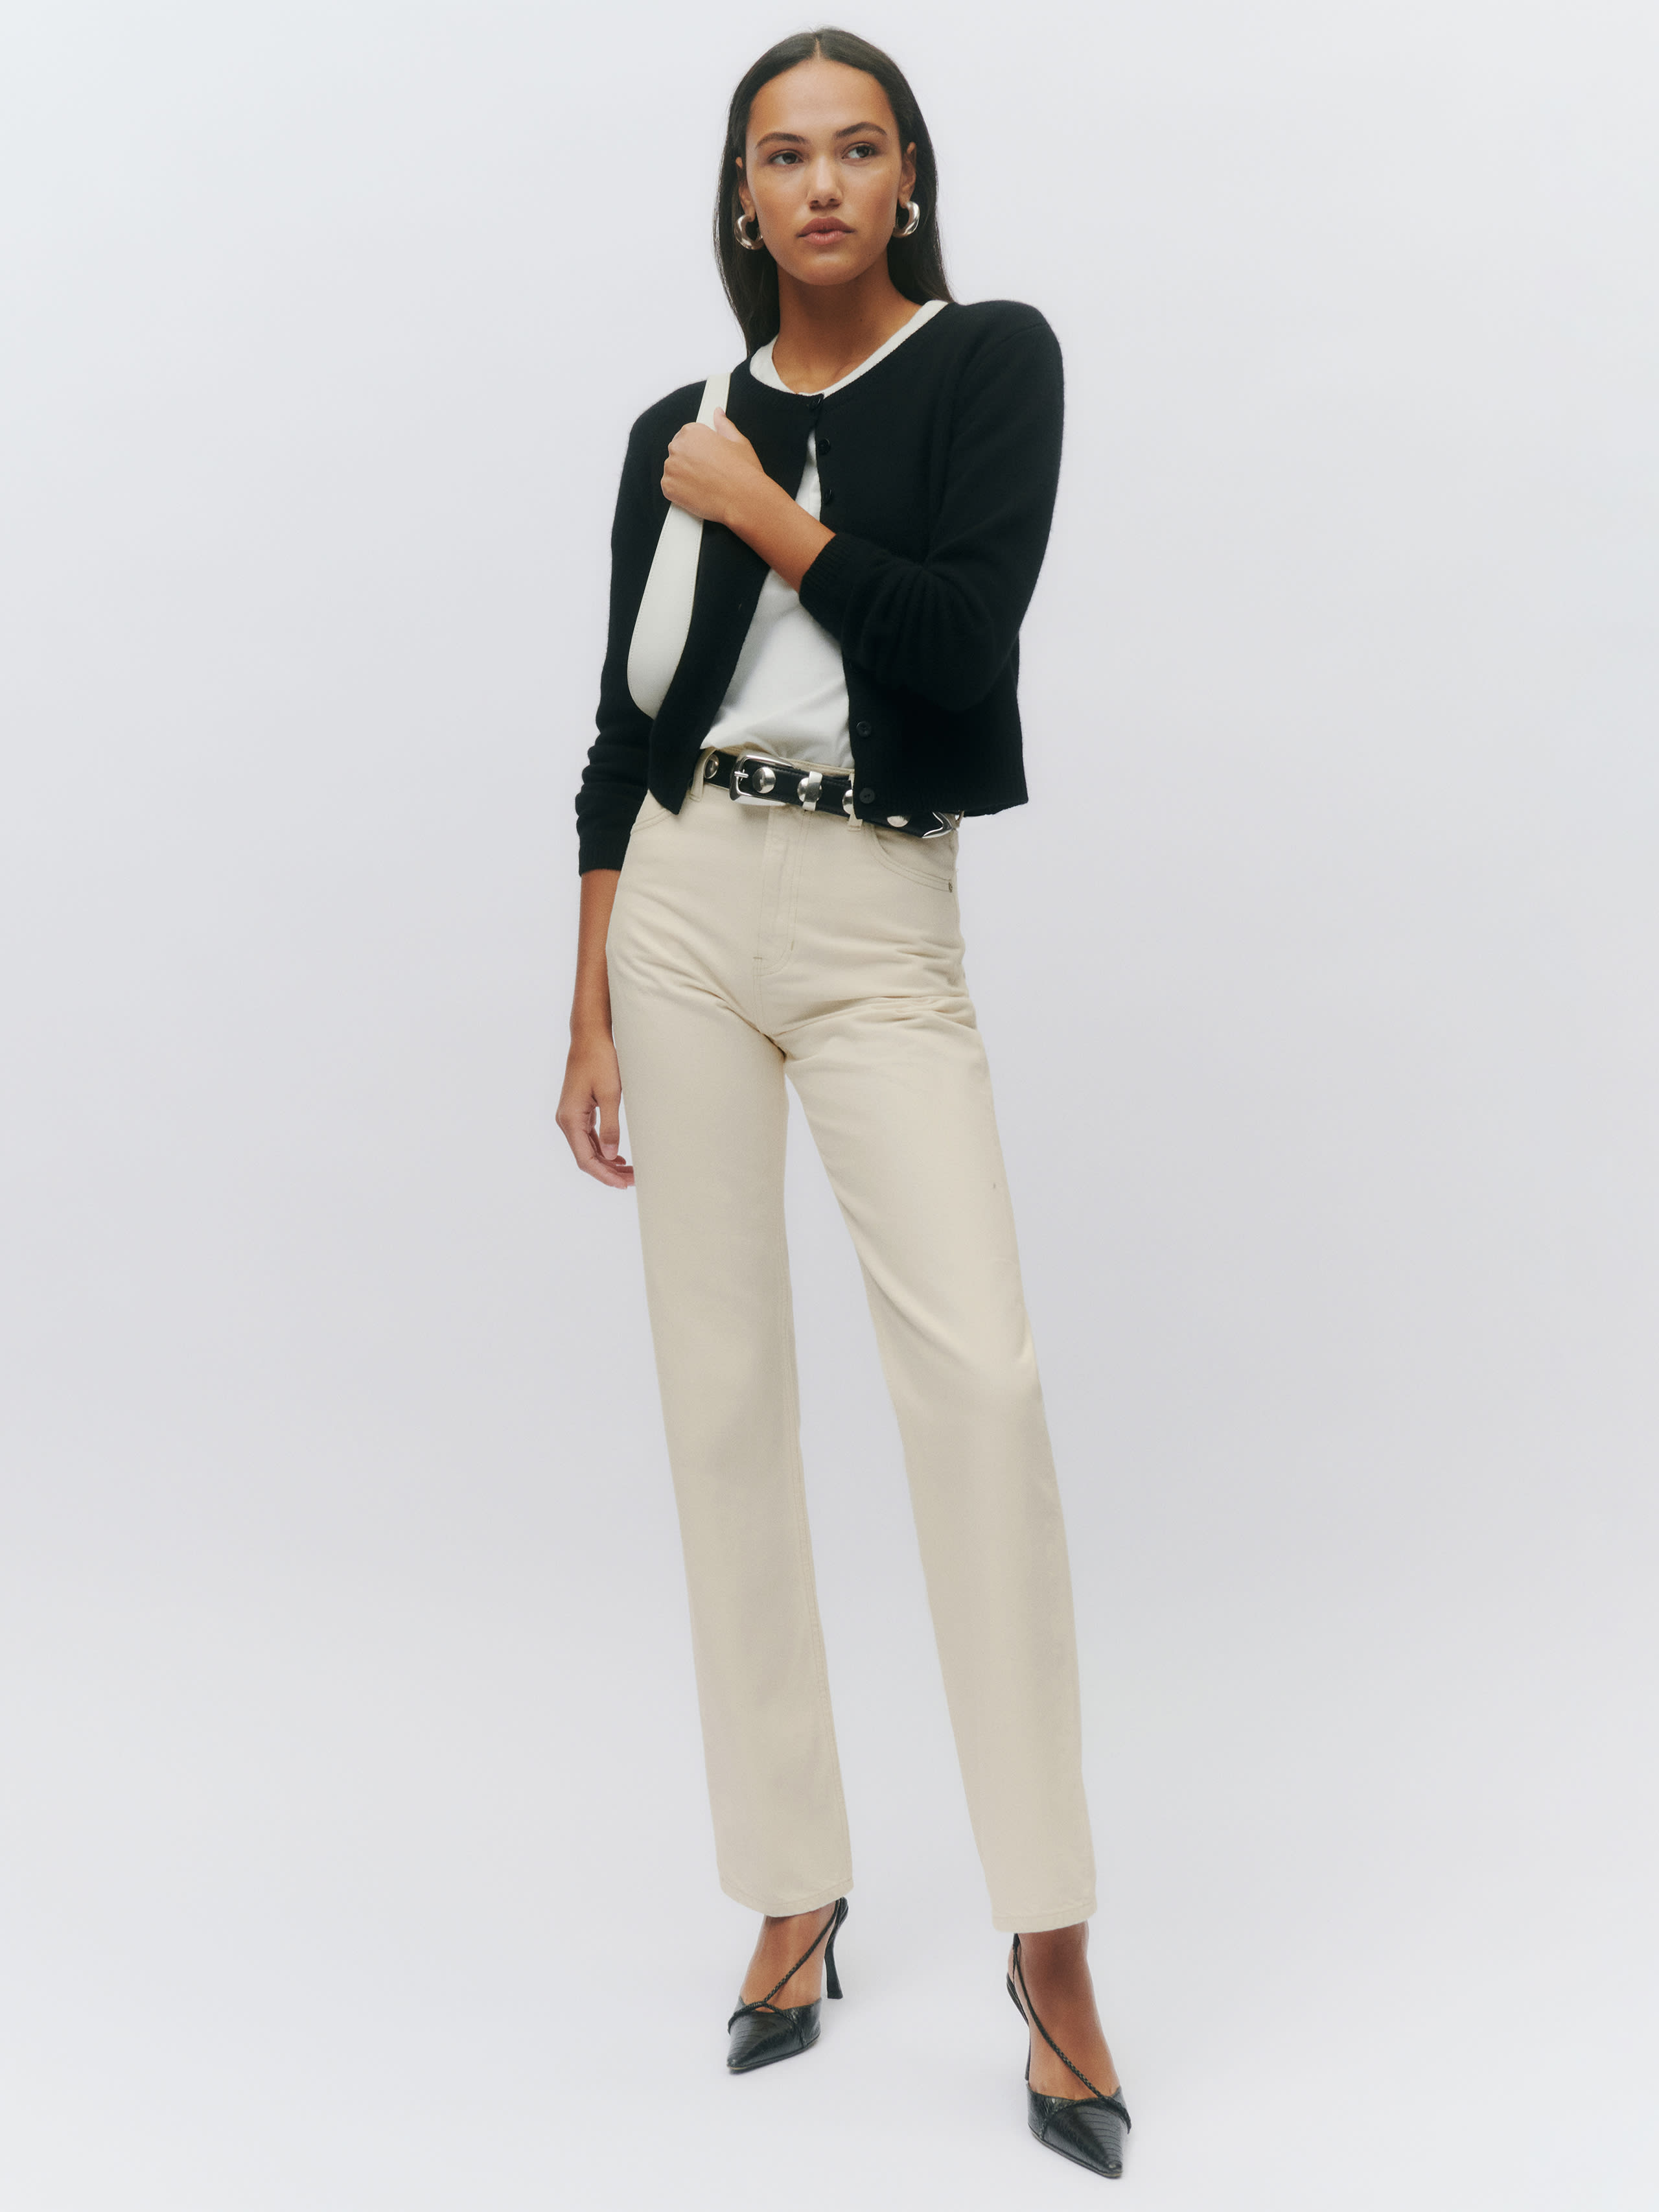 Reformation Abby High Rise Straight Jeans In Fior Di Latte